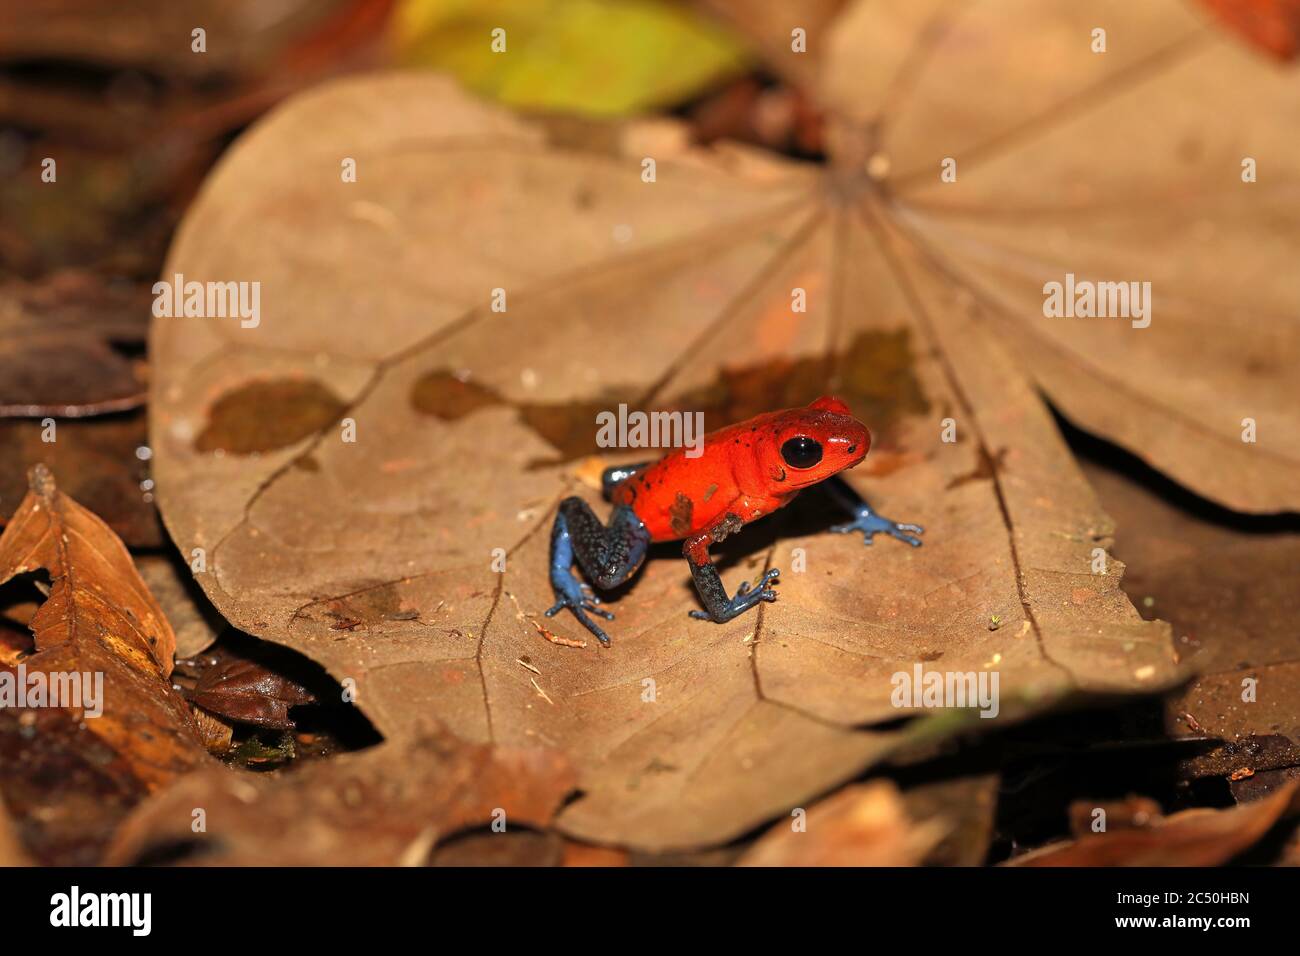 Strawberry poison-arrrow frog, Red-and-blue poison-arrow frog, Flaming poison-arrow frog, Blue Jeans Poison Dart Frog (Dendrobates pumilio, Oophaga pumilio), sitting in fallen leaves on the ground, side view, Costa Rica, Sarapiqui Stock Photo